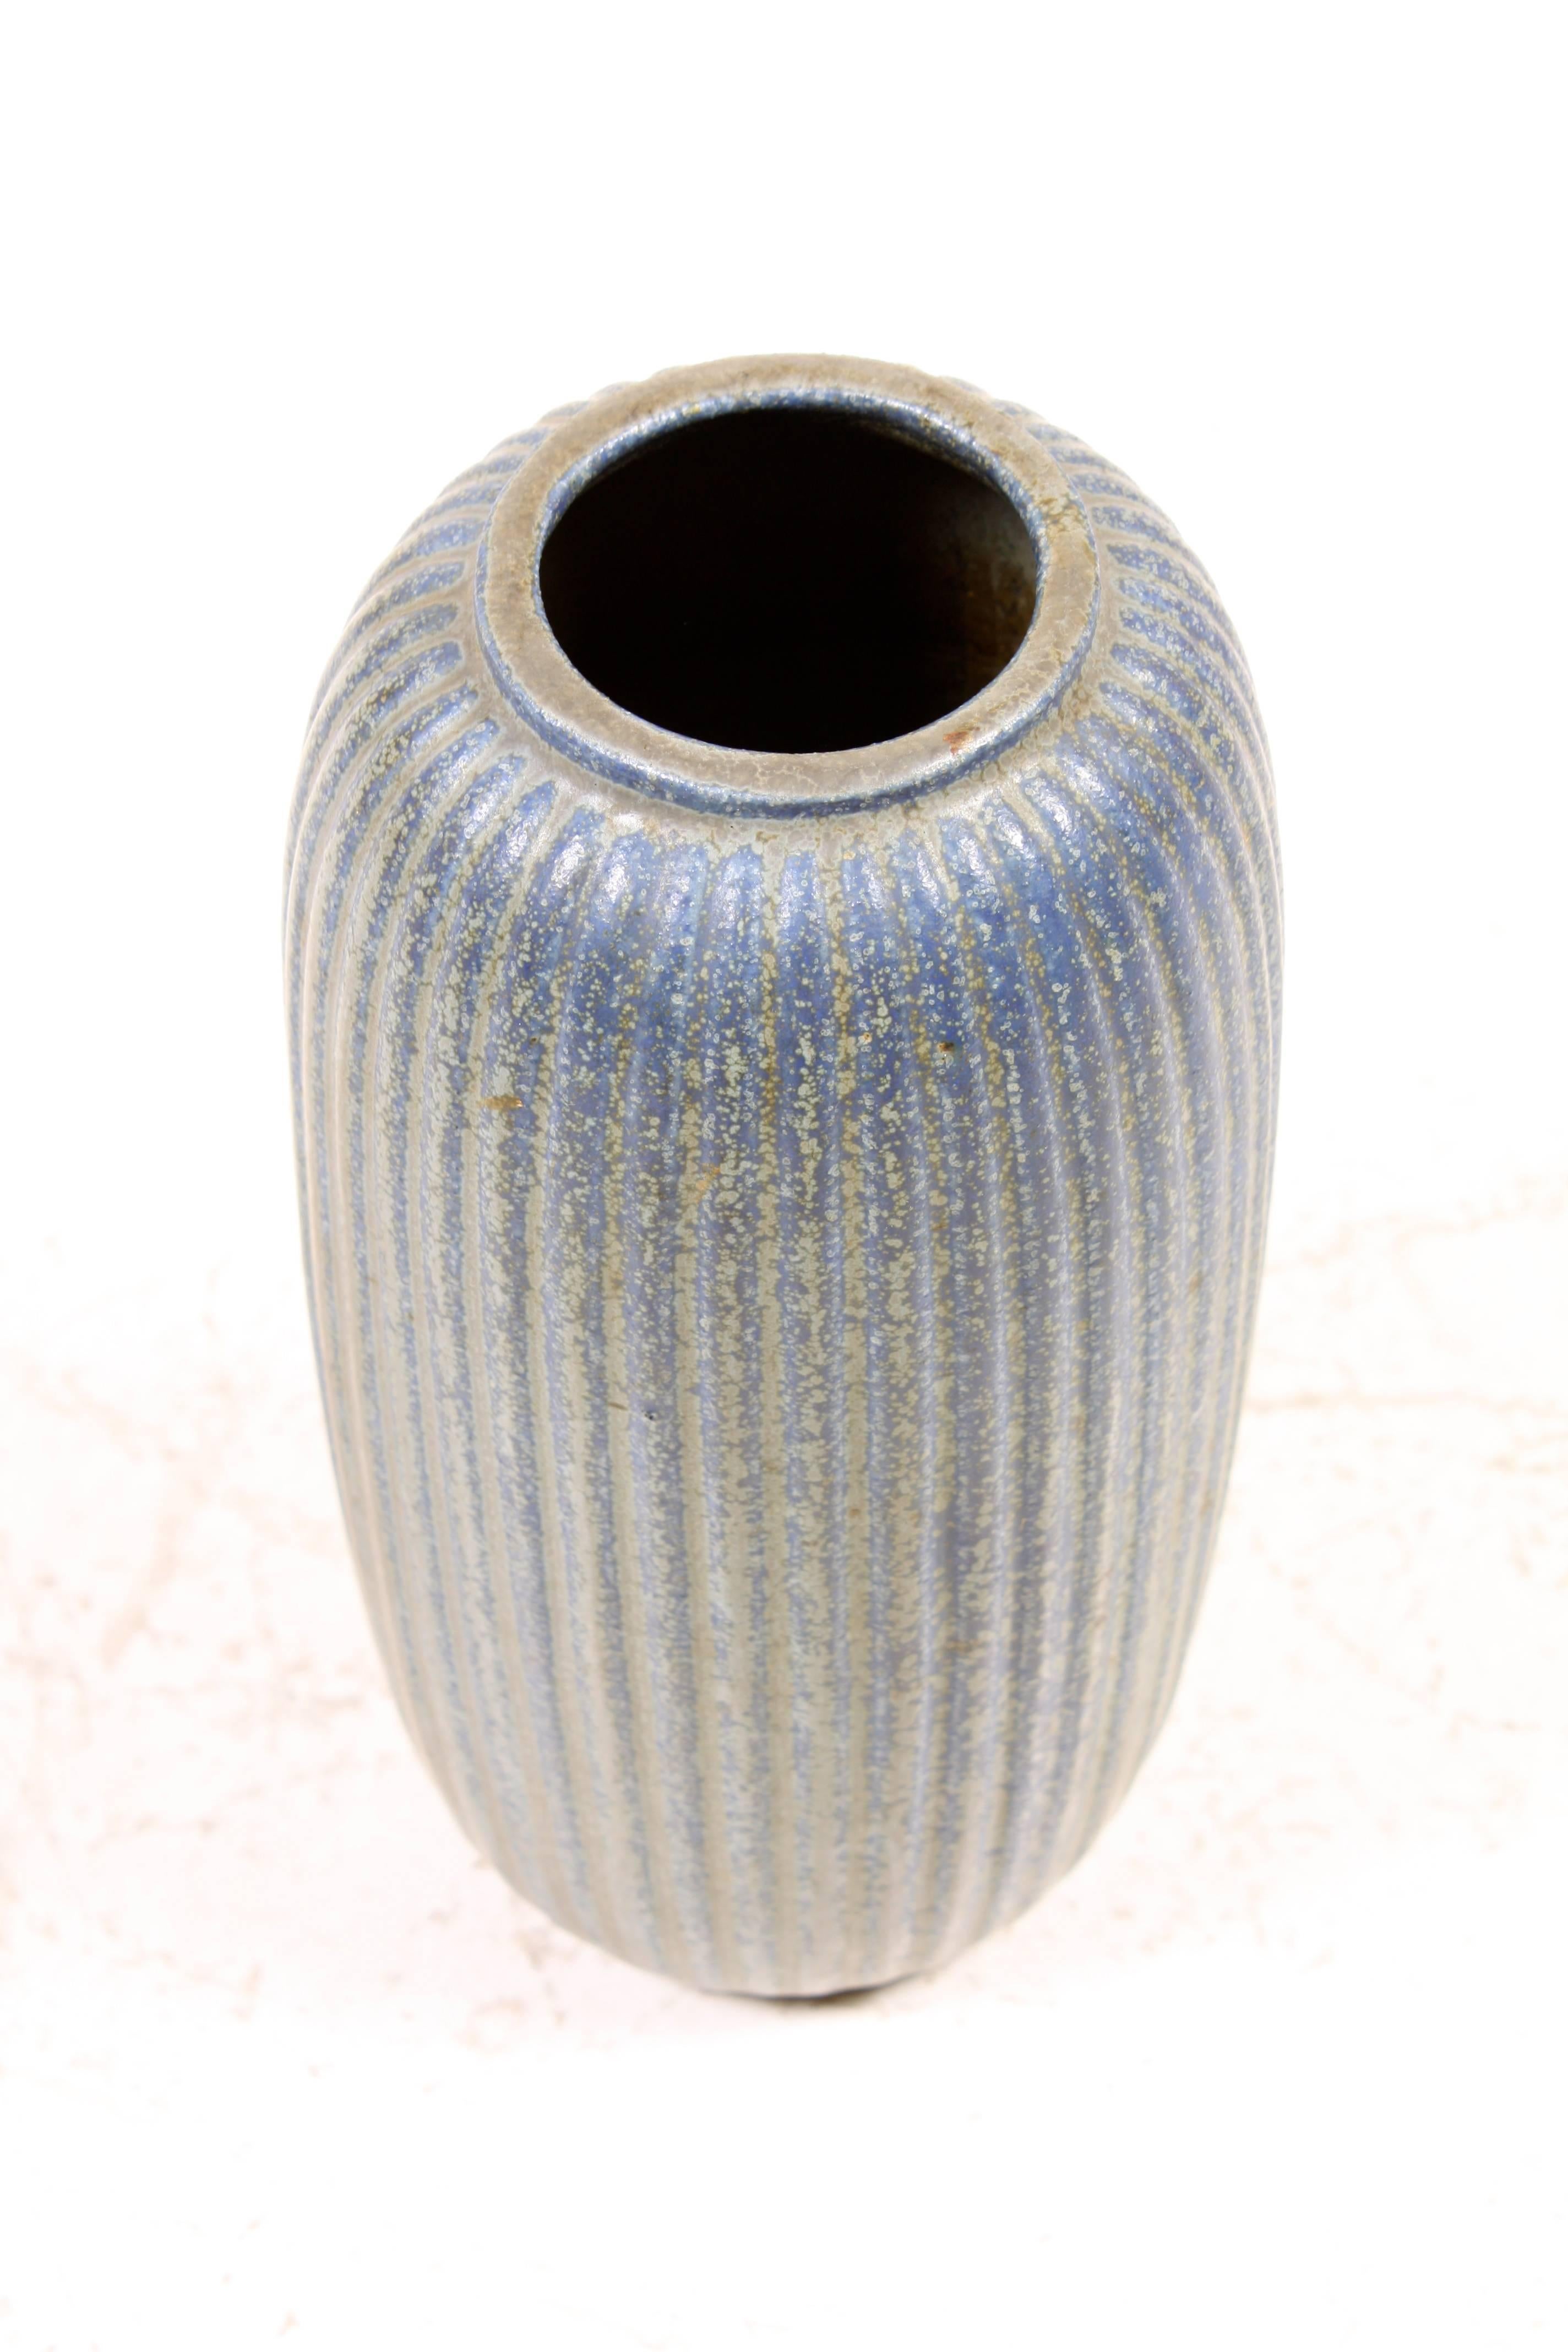 Stunning stoneware vase by Arne Bang made in Denmark in the 1940's Great original condition.